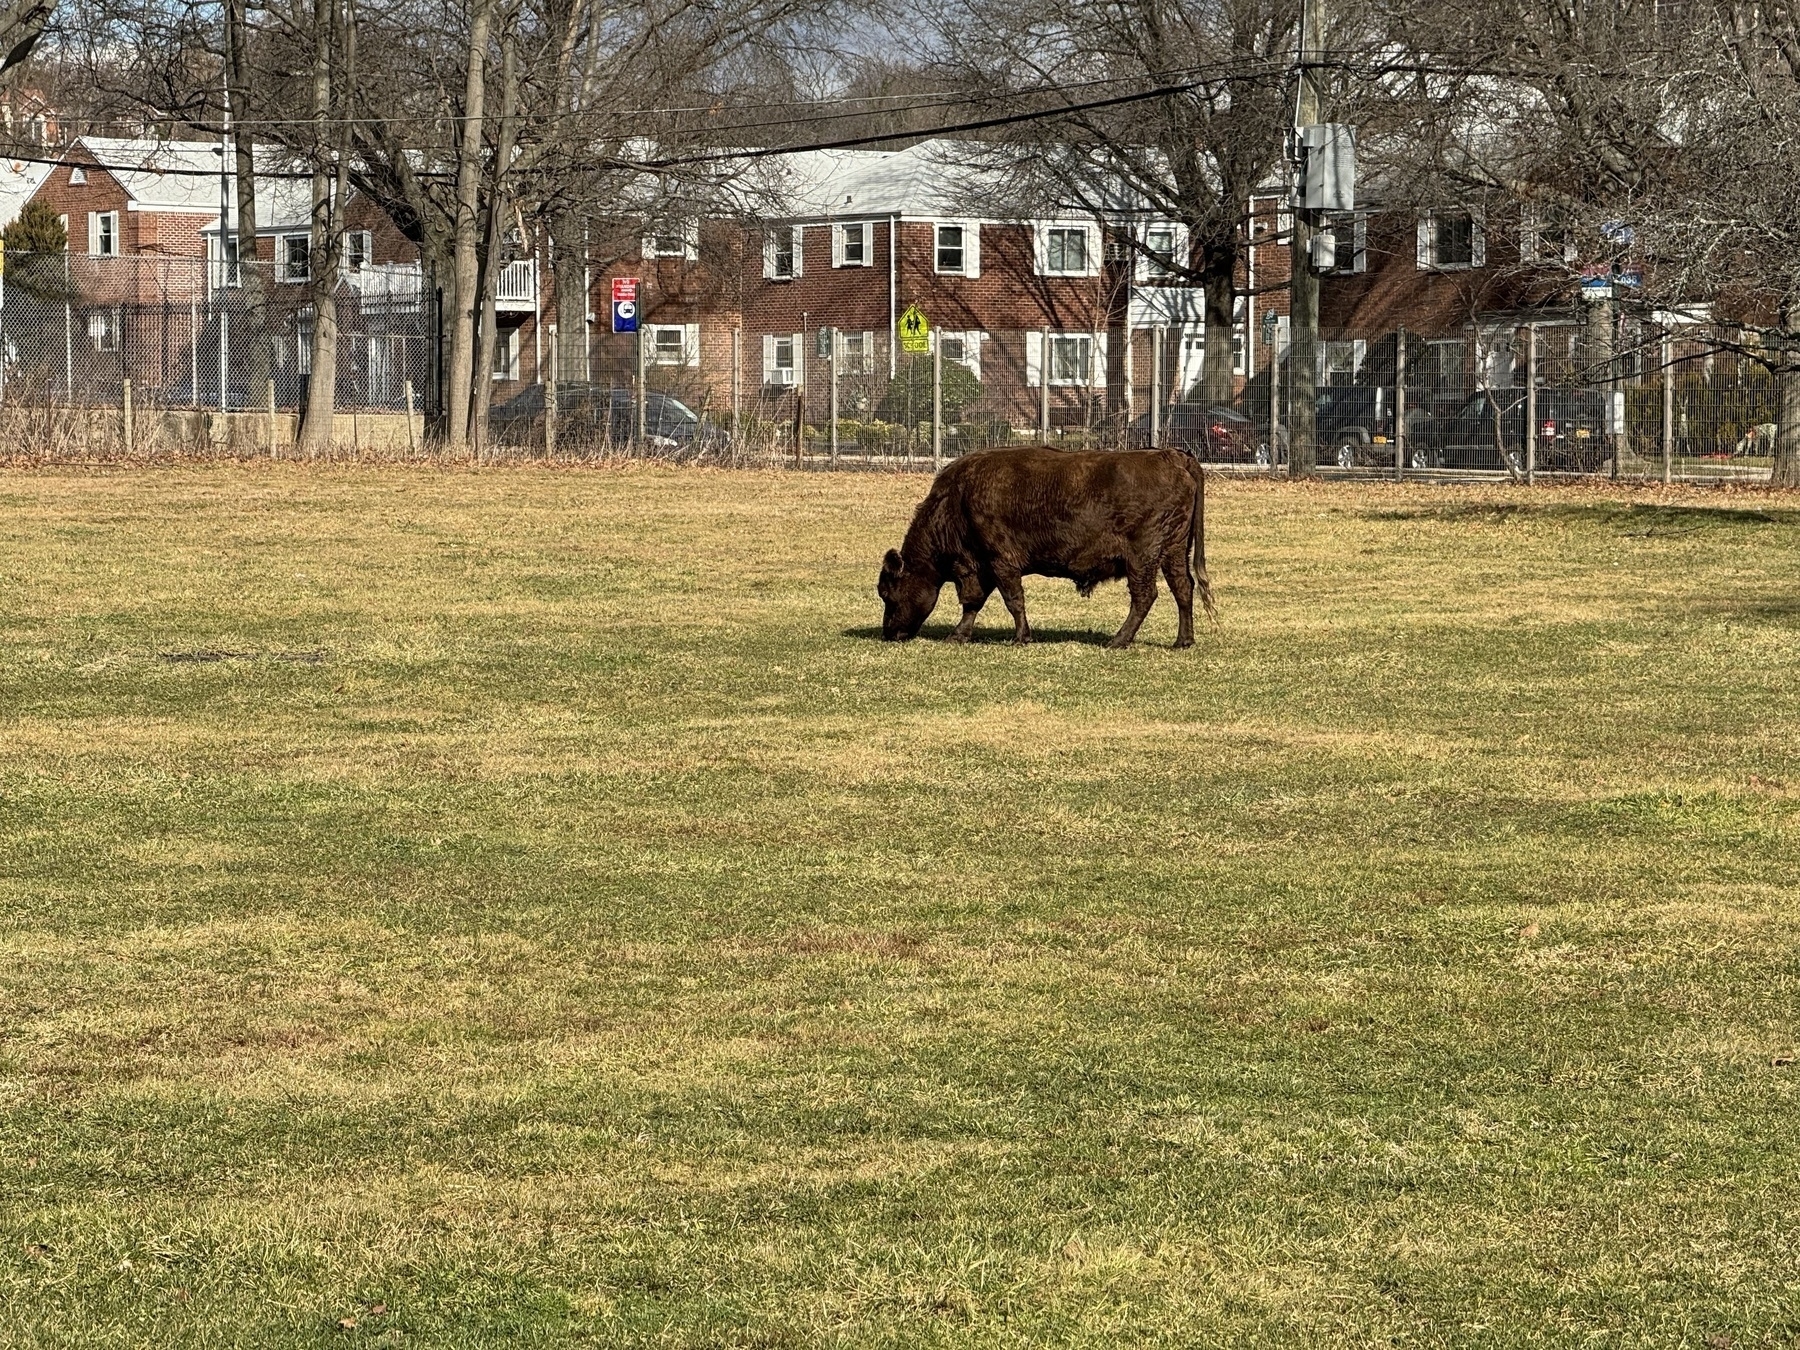 A brown cow standing in a field with row houses/apartments in the background.